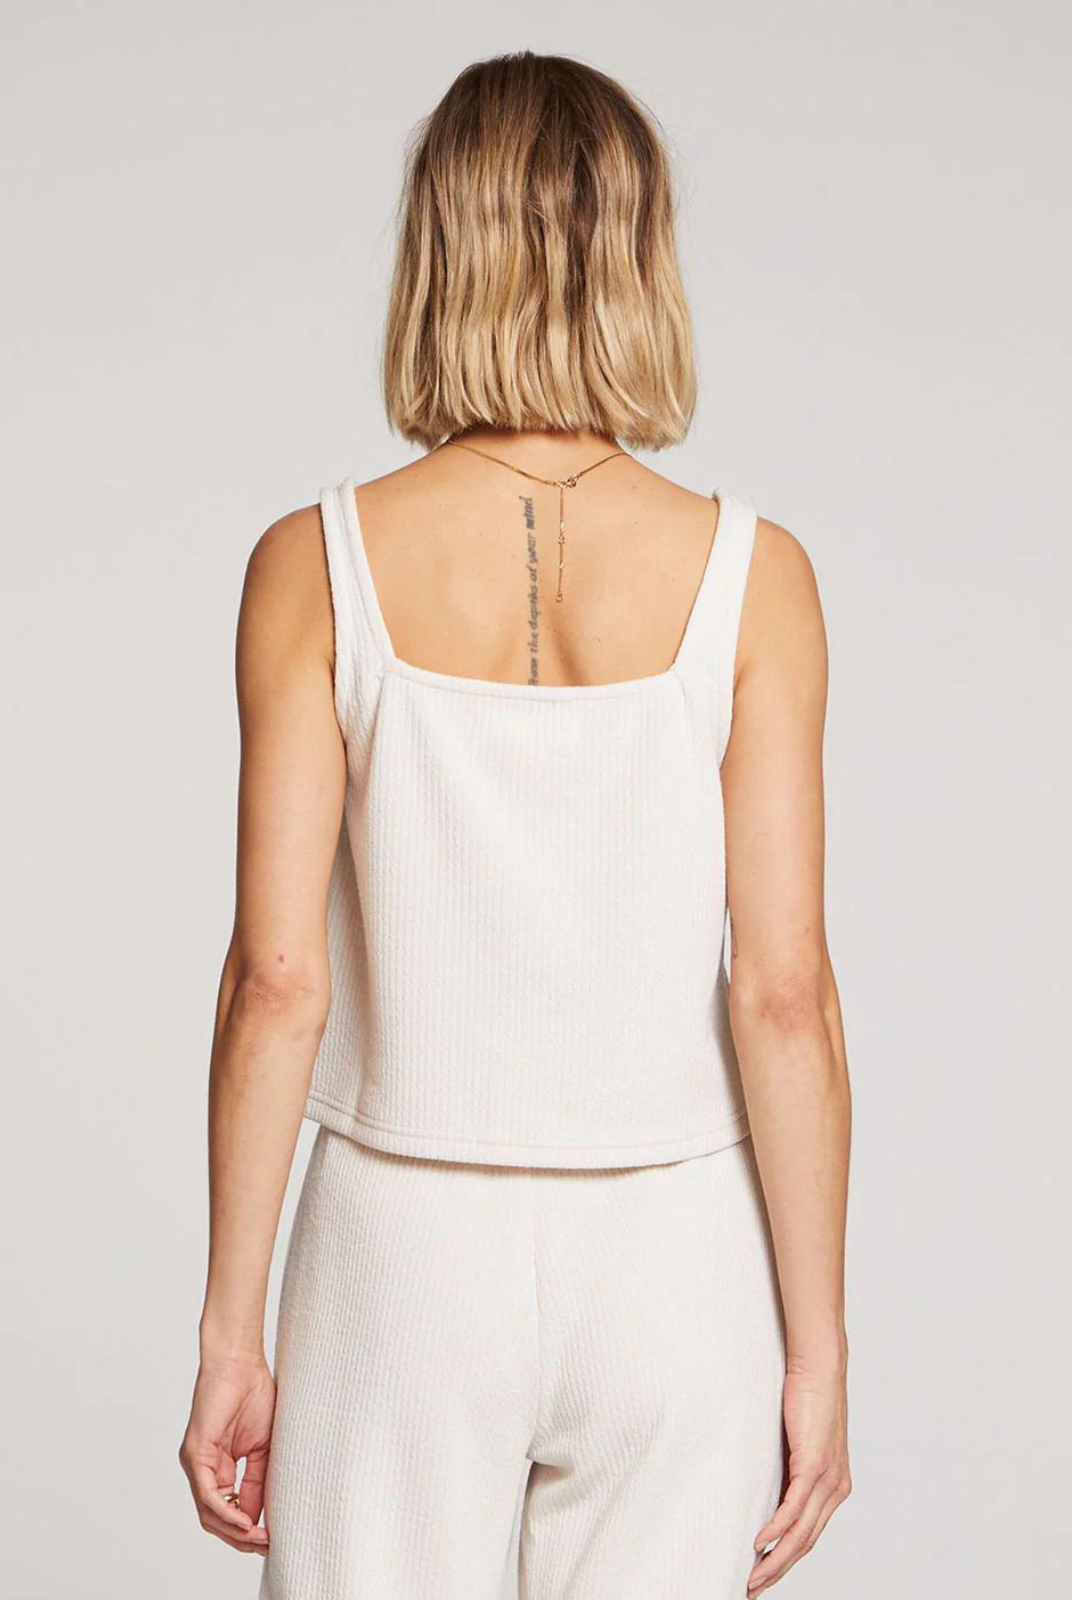  Analyzing image     essential-tank-salt  1140 × 1600px  Saltwater Luxe Essential Tank - Salt. You can never own too many basics. Our tank top in salt is a great addition to wear alone or layered.